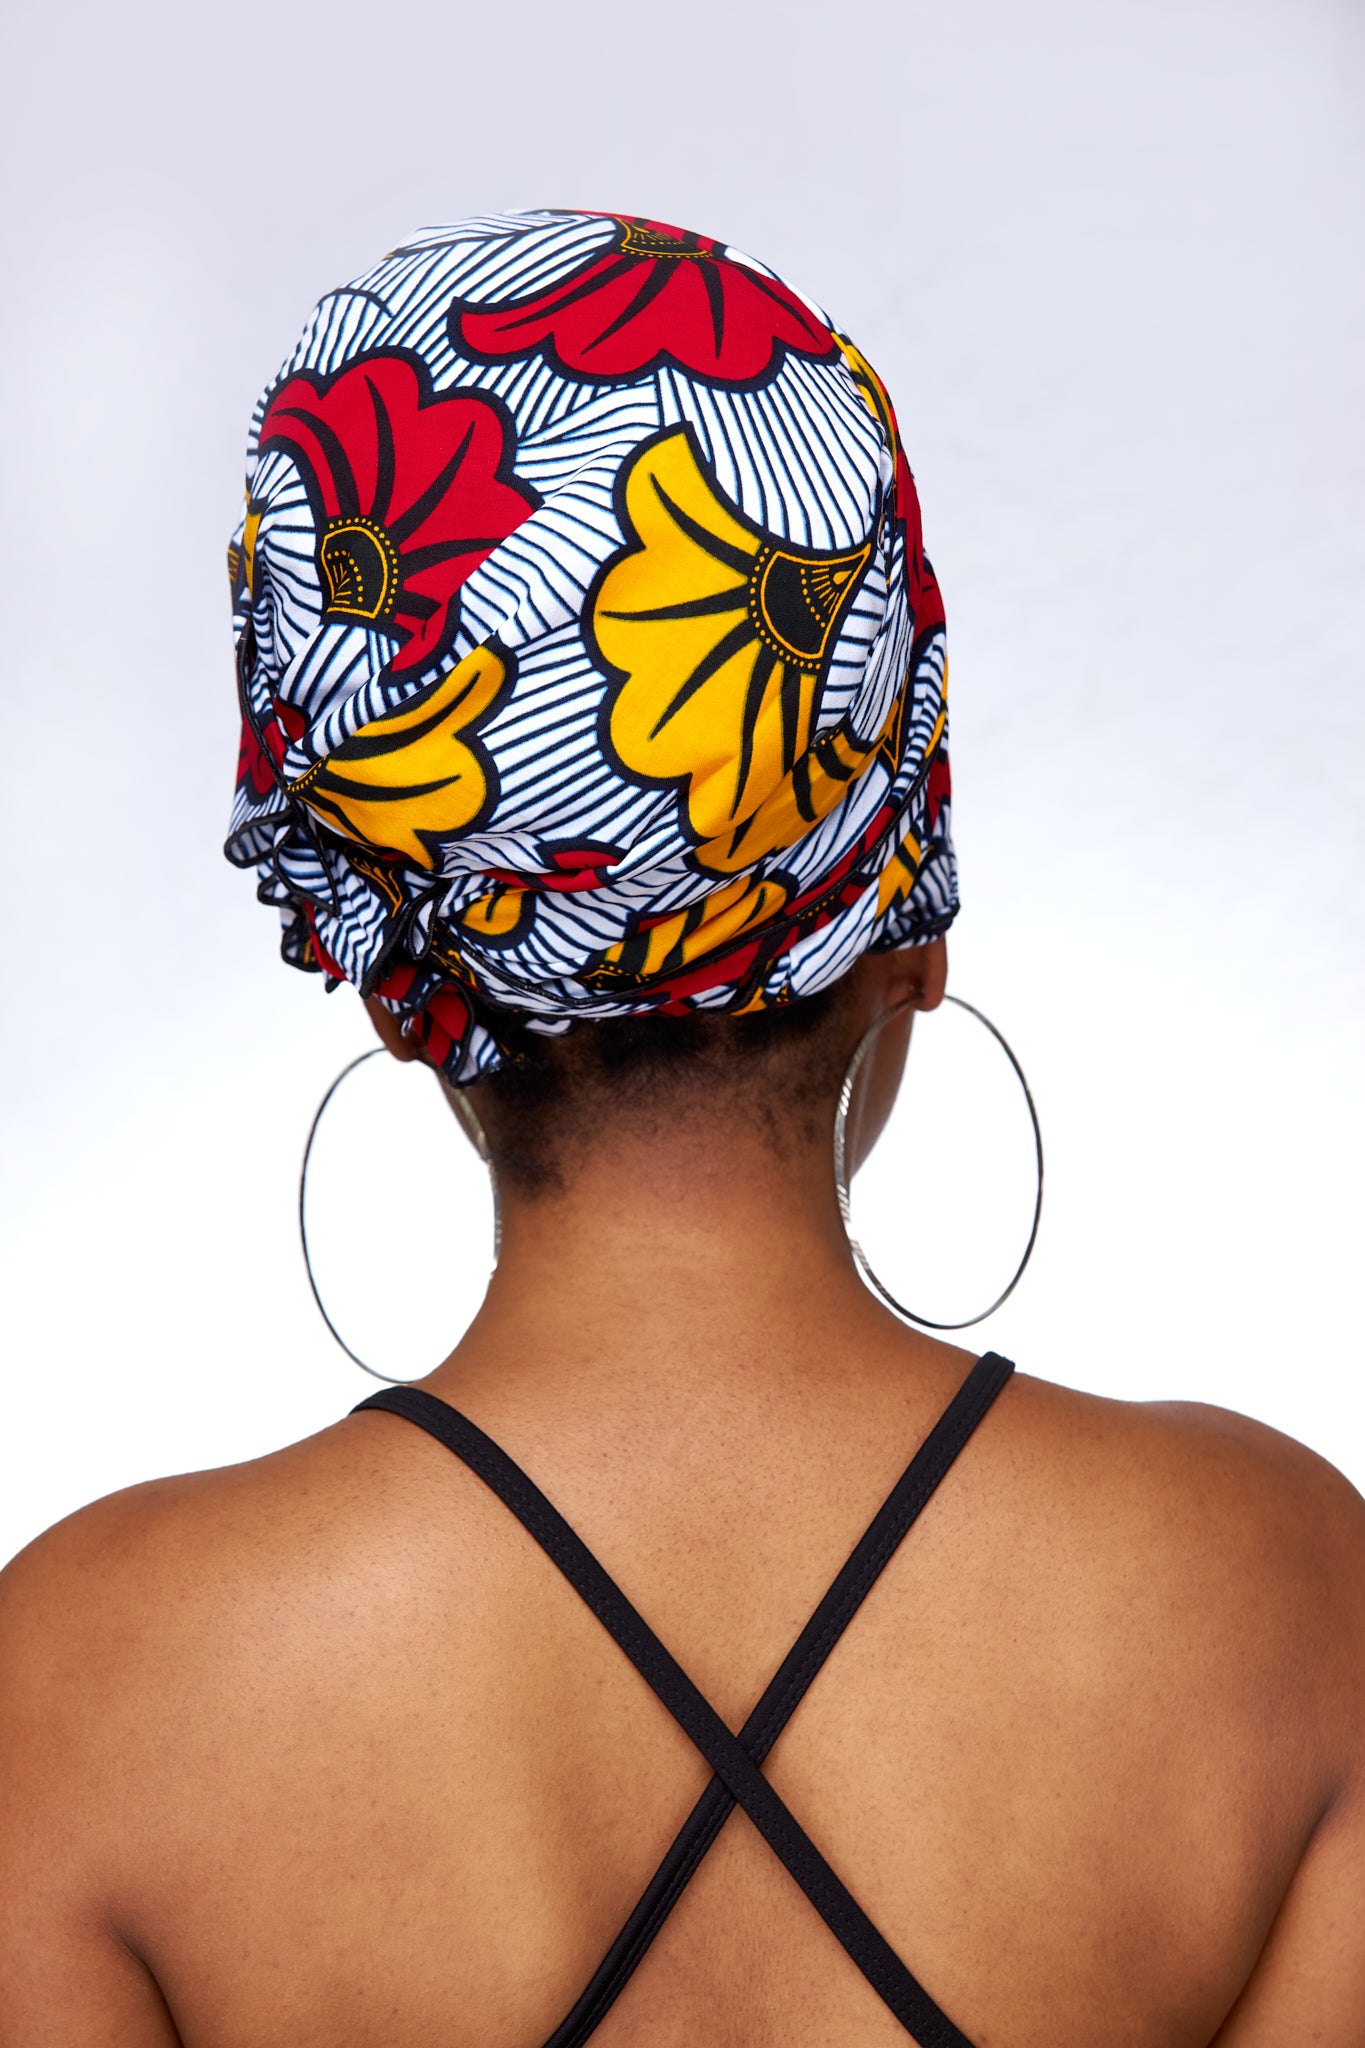 White Black Striped with Yellow,Red drawn Flowers Ankara High Cotton Print Fabric Detachable Silklined Headwrap